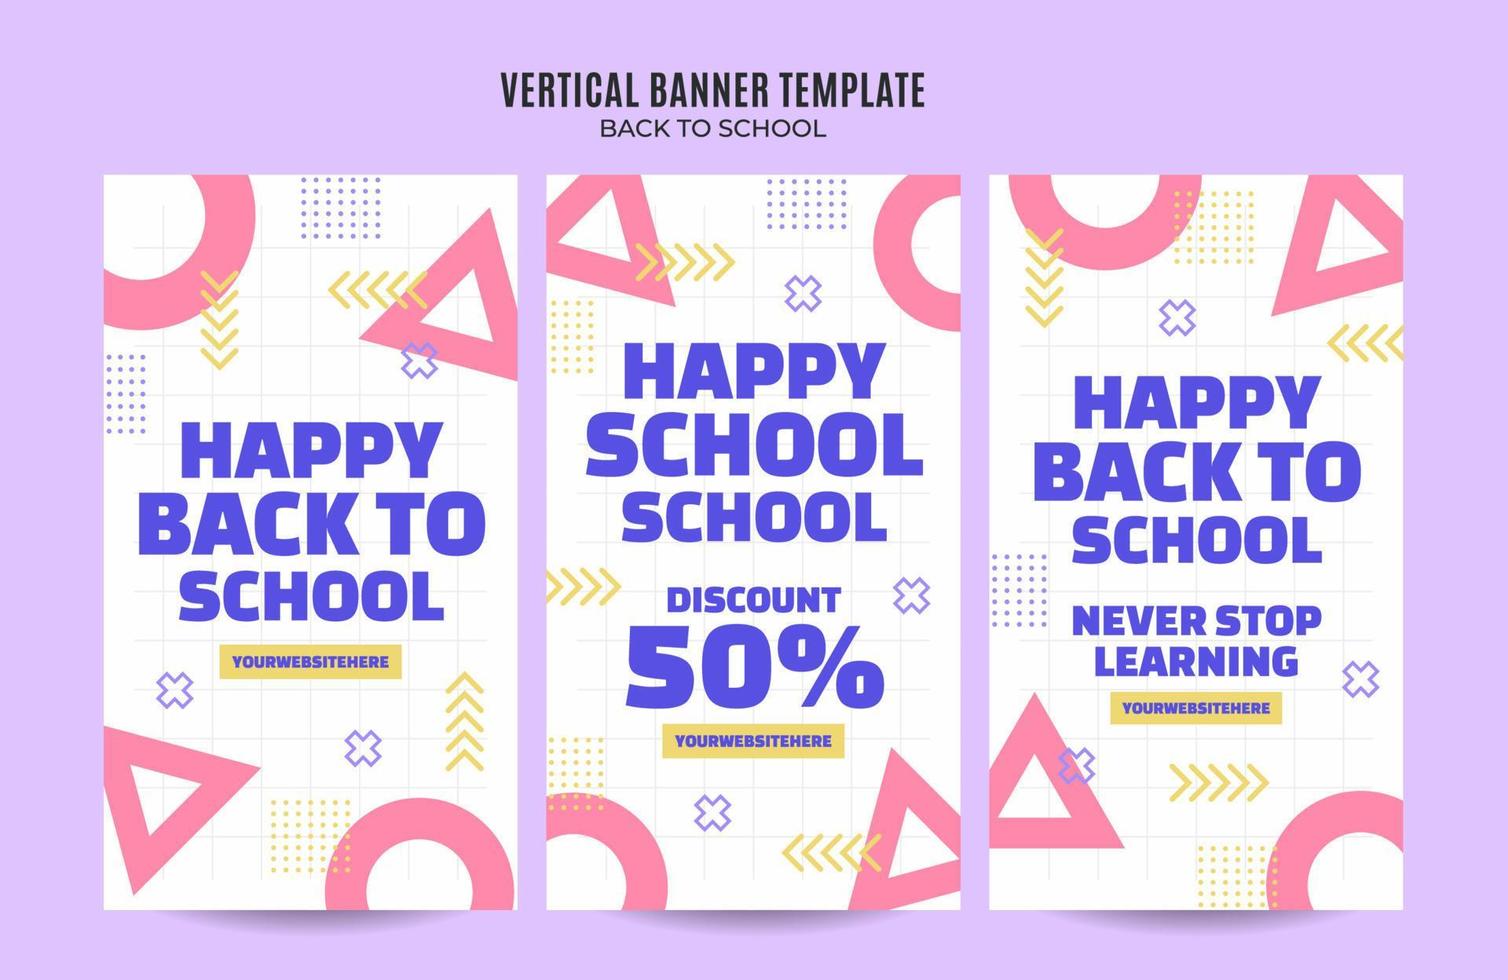 Back to School Web Banner for Social Media Vertical Poster, banner, space area and background vector